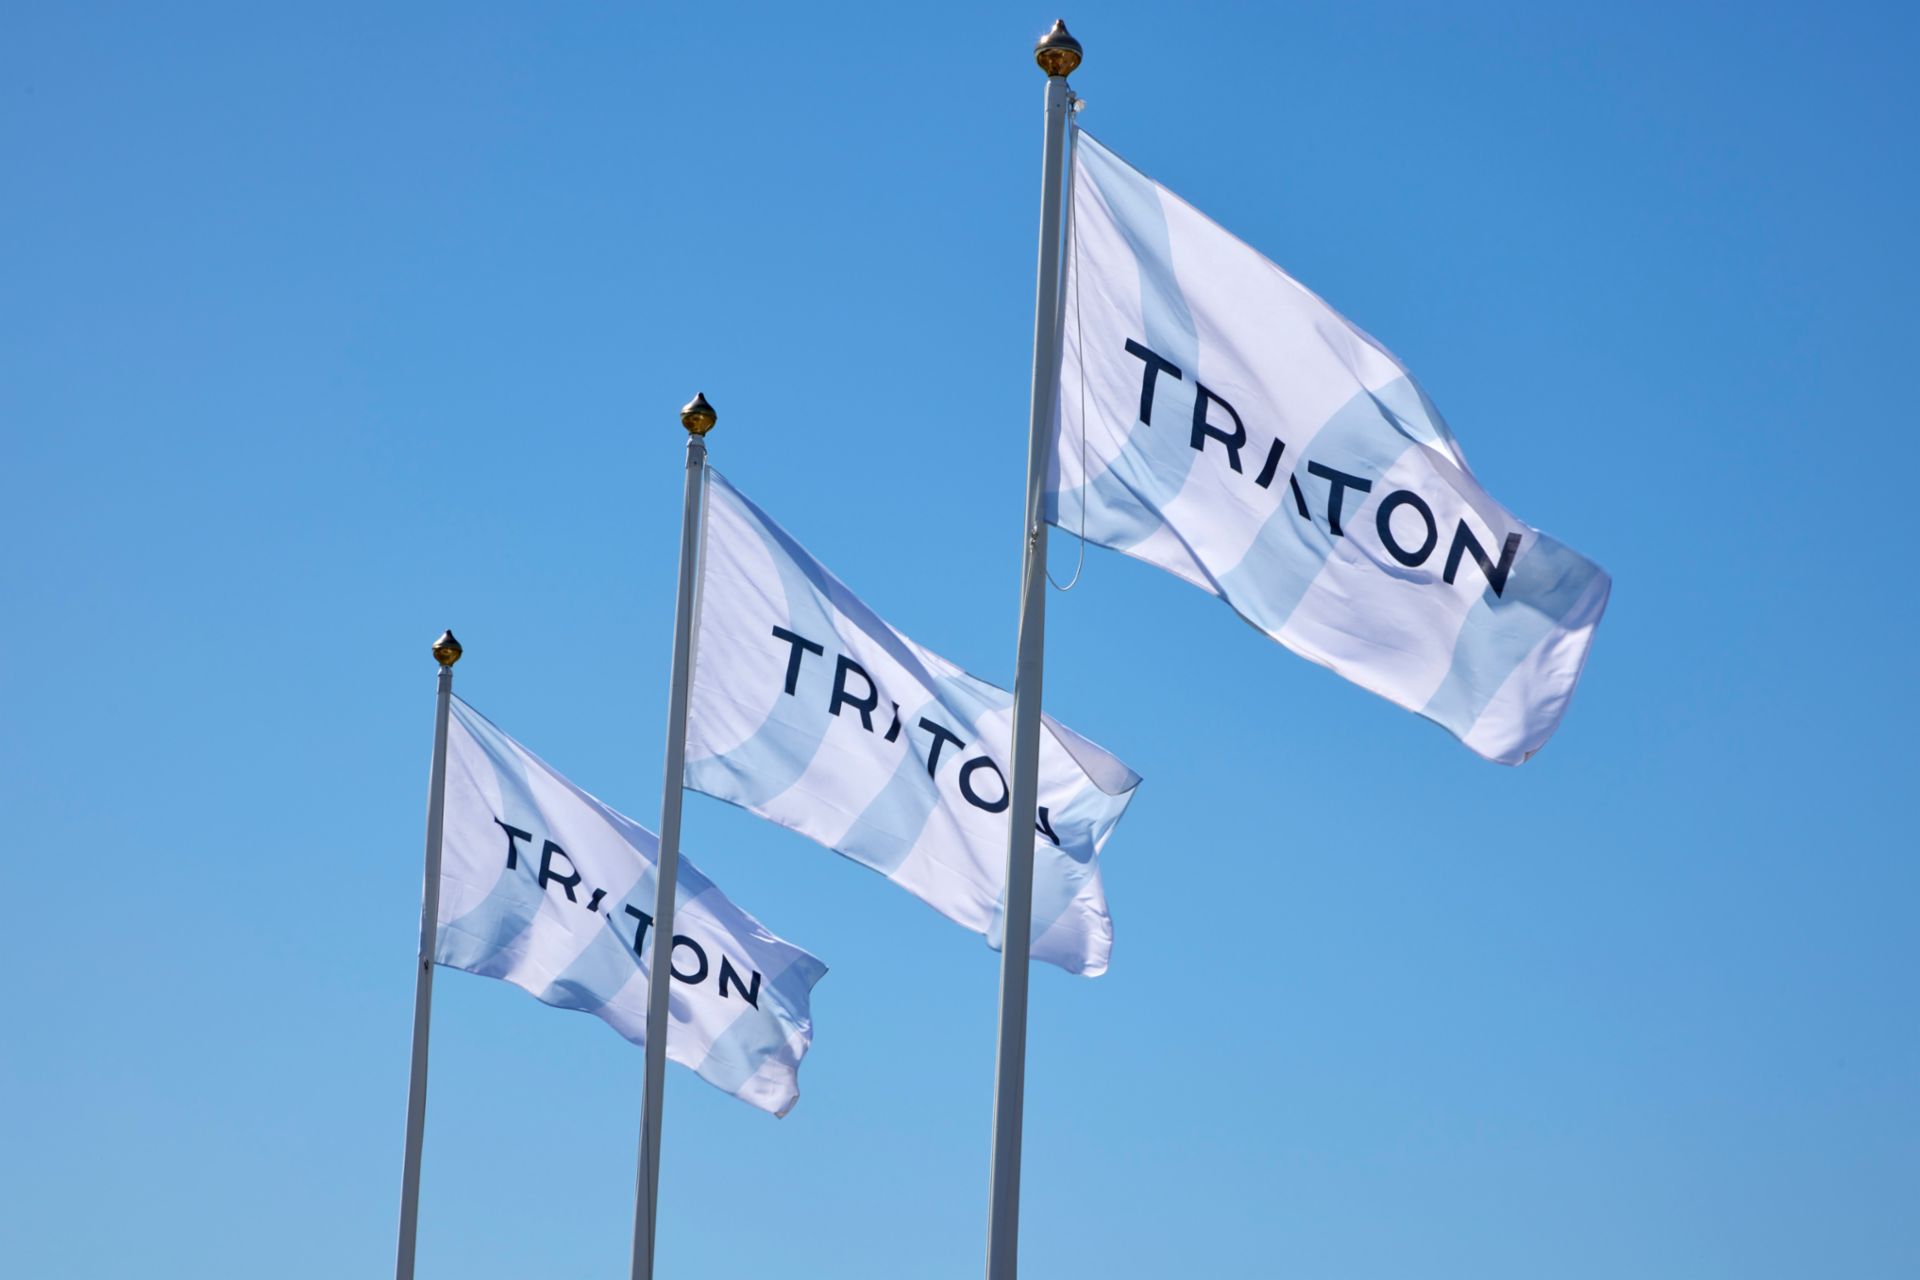 TRATON GROUP Flags